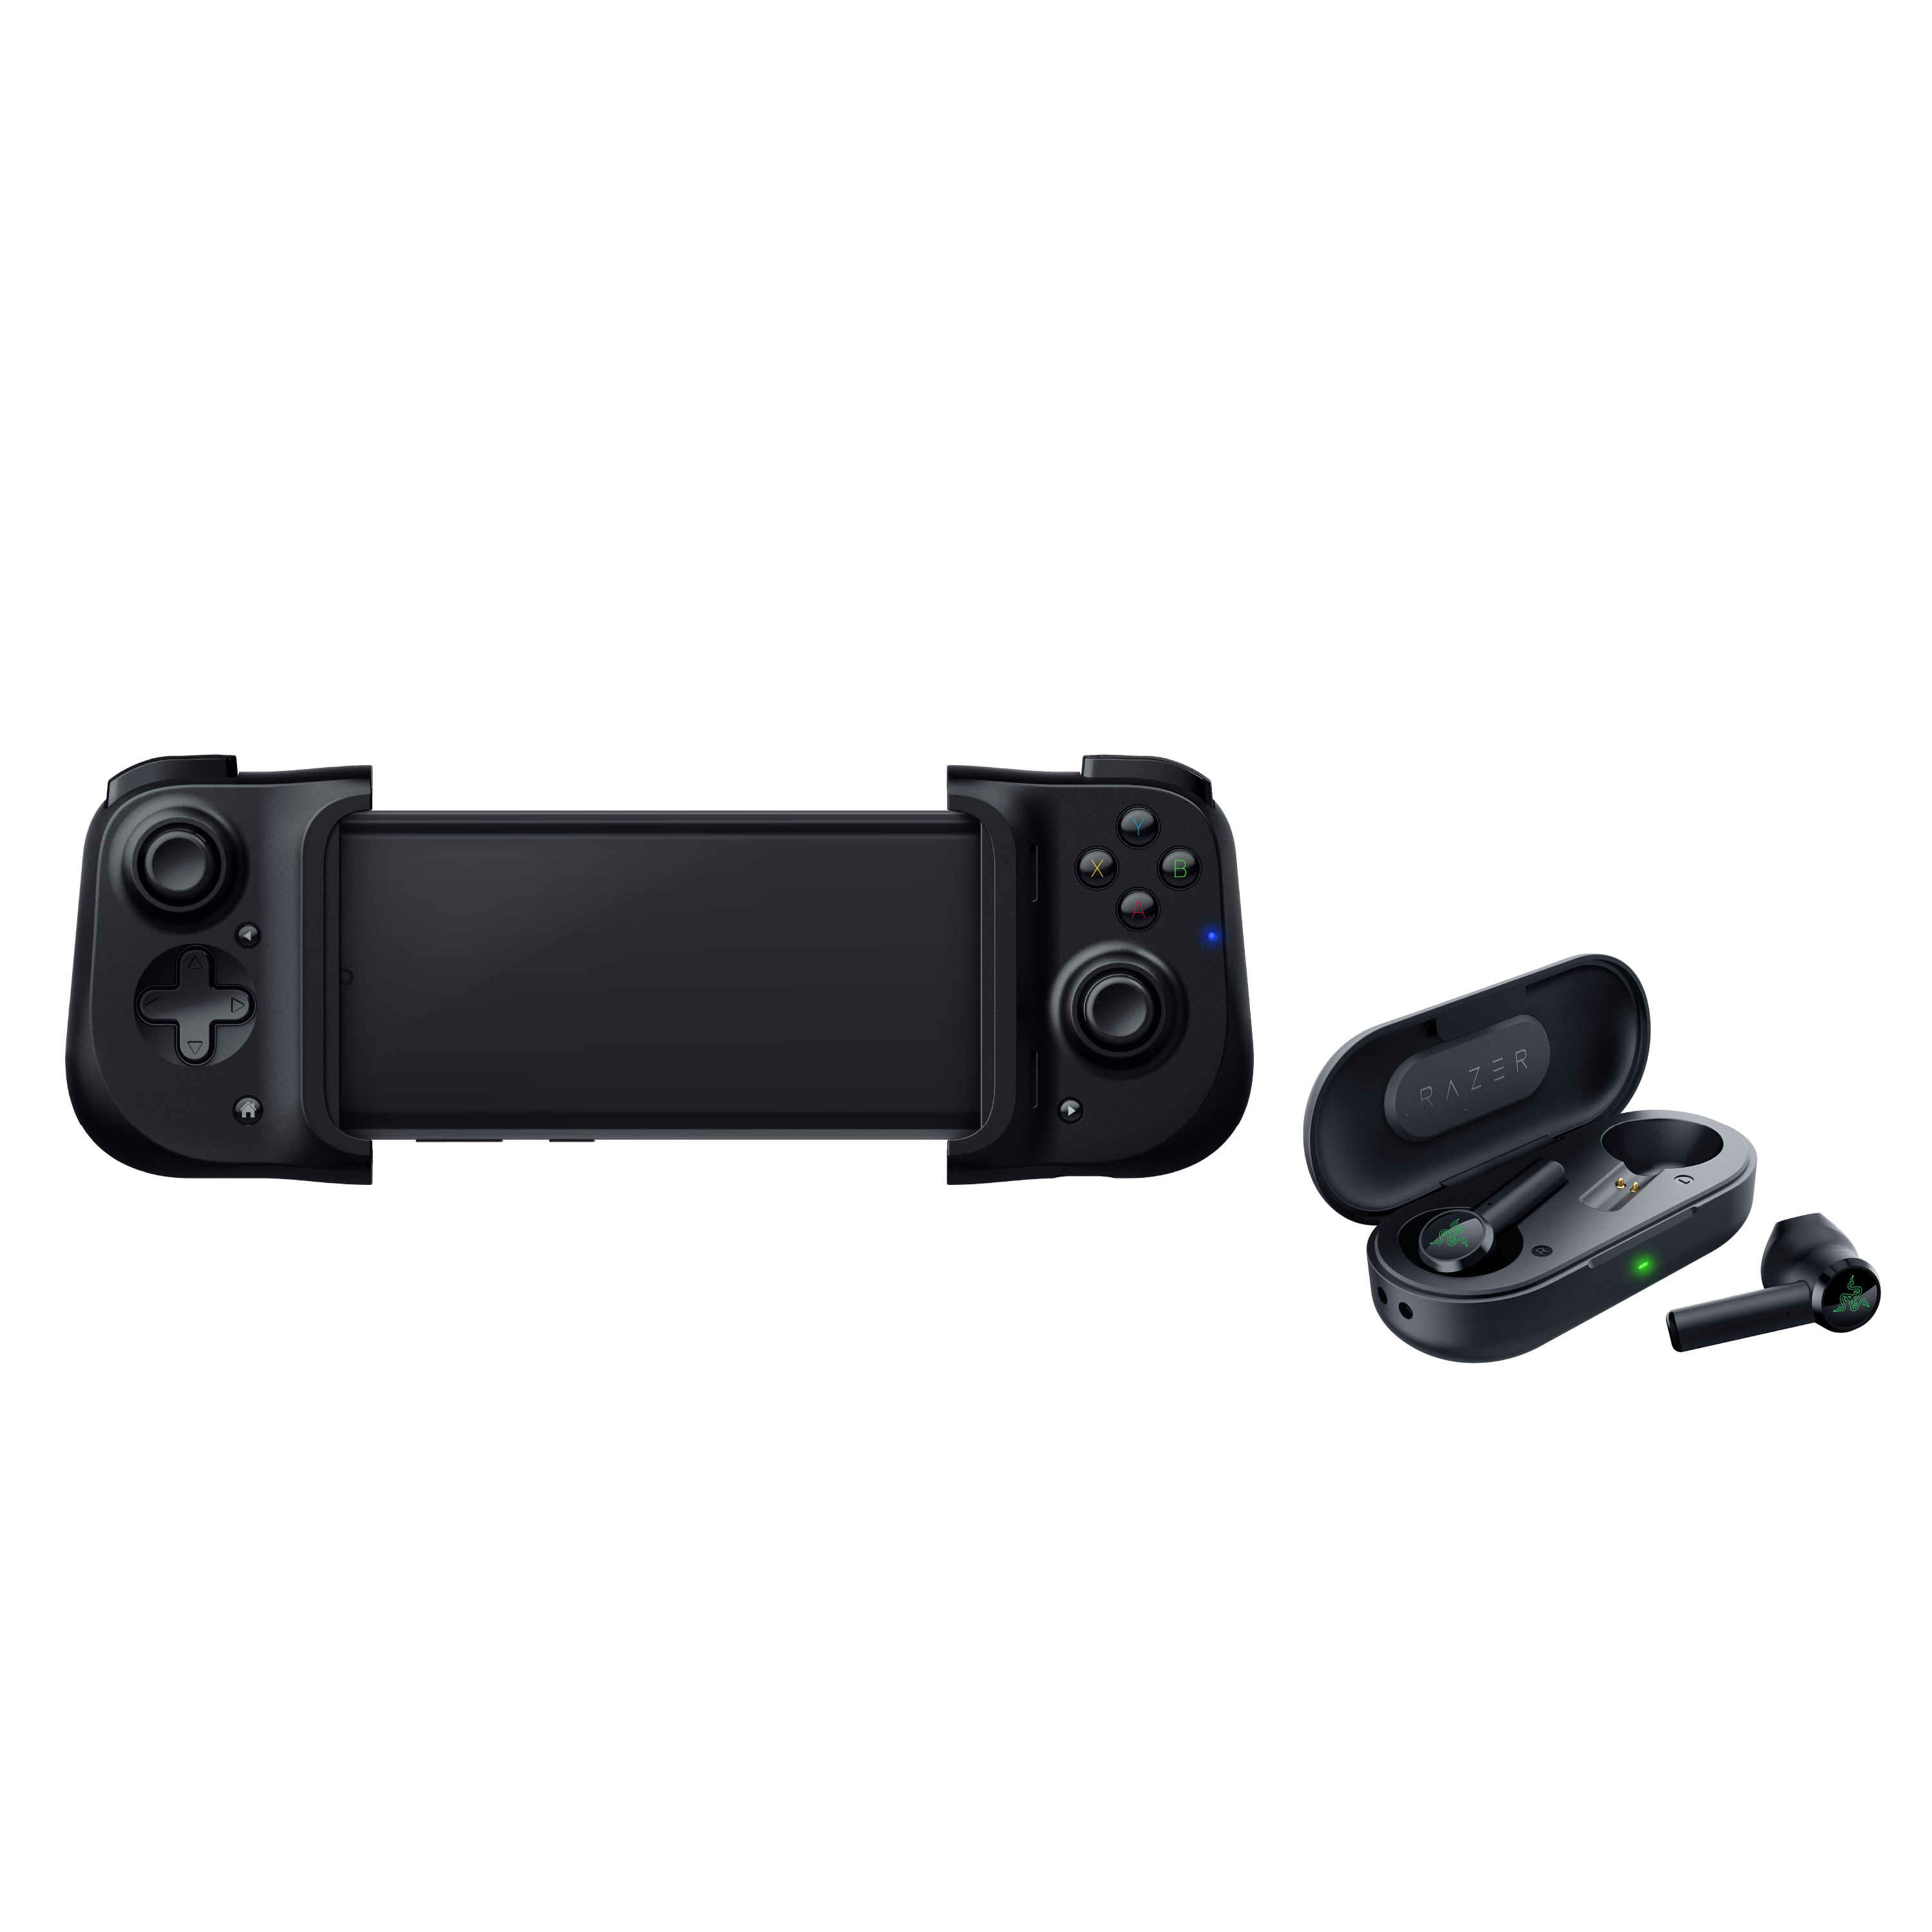 Razer Mobile Gaming Bundle - Includes Kishi for Android and Hammerhead True Wireless Headphones - image 1 of 7